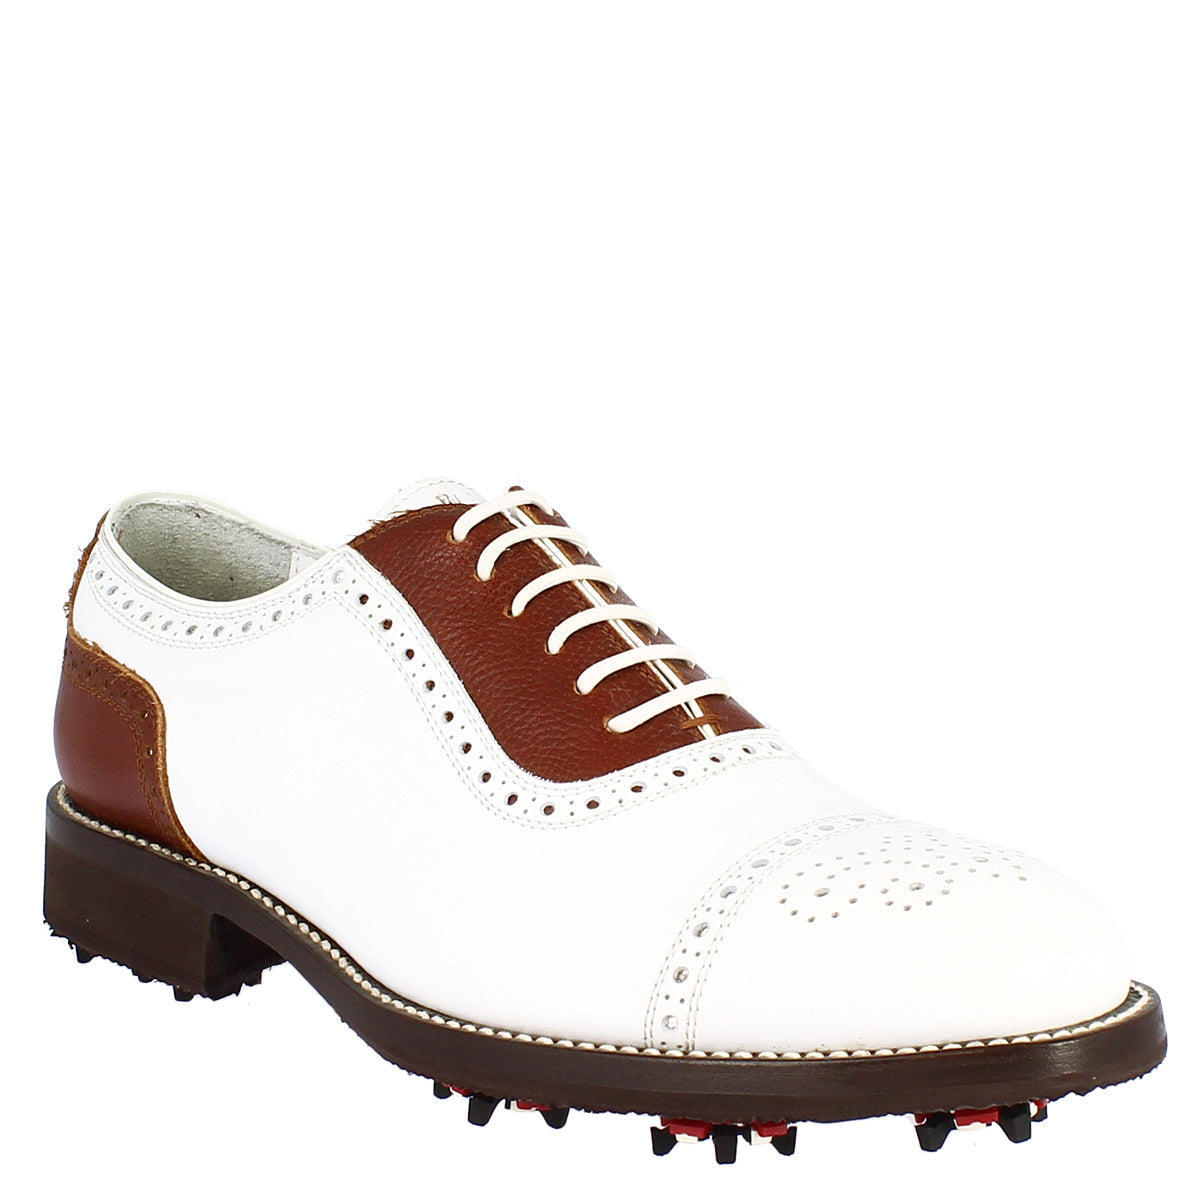 Classic handmade women's golf shoes in brown white calf leather